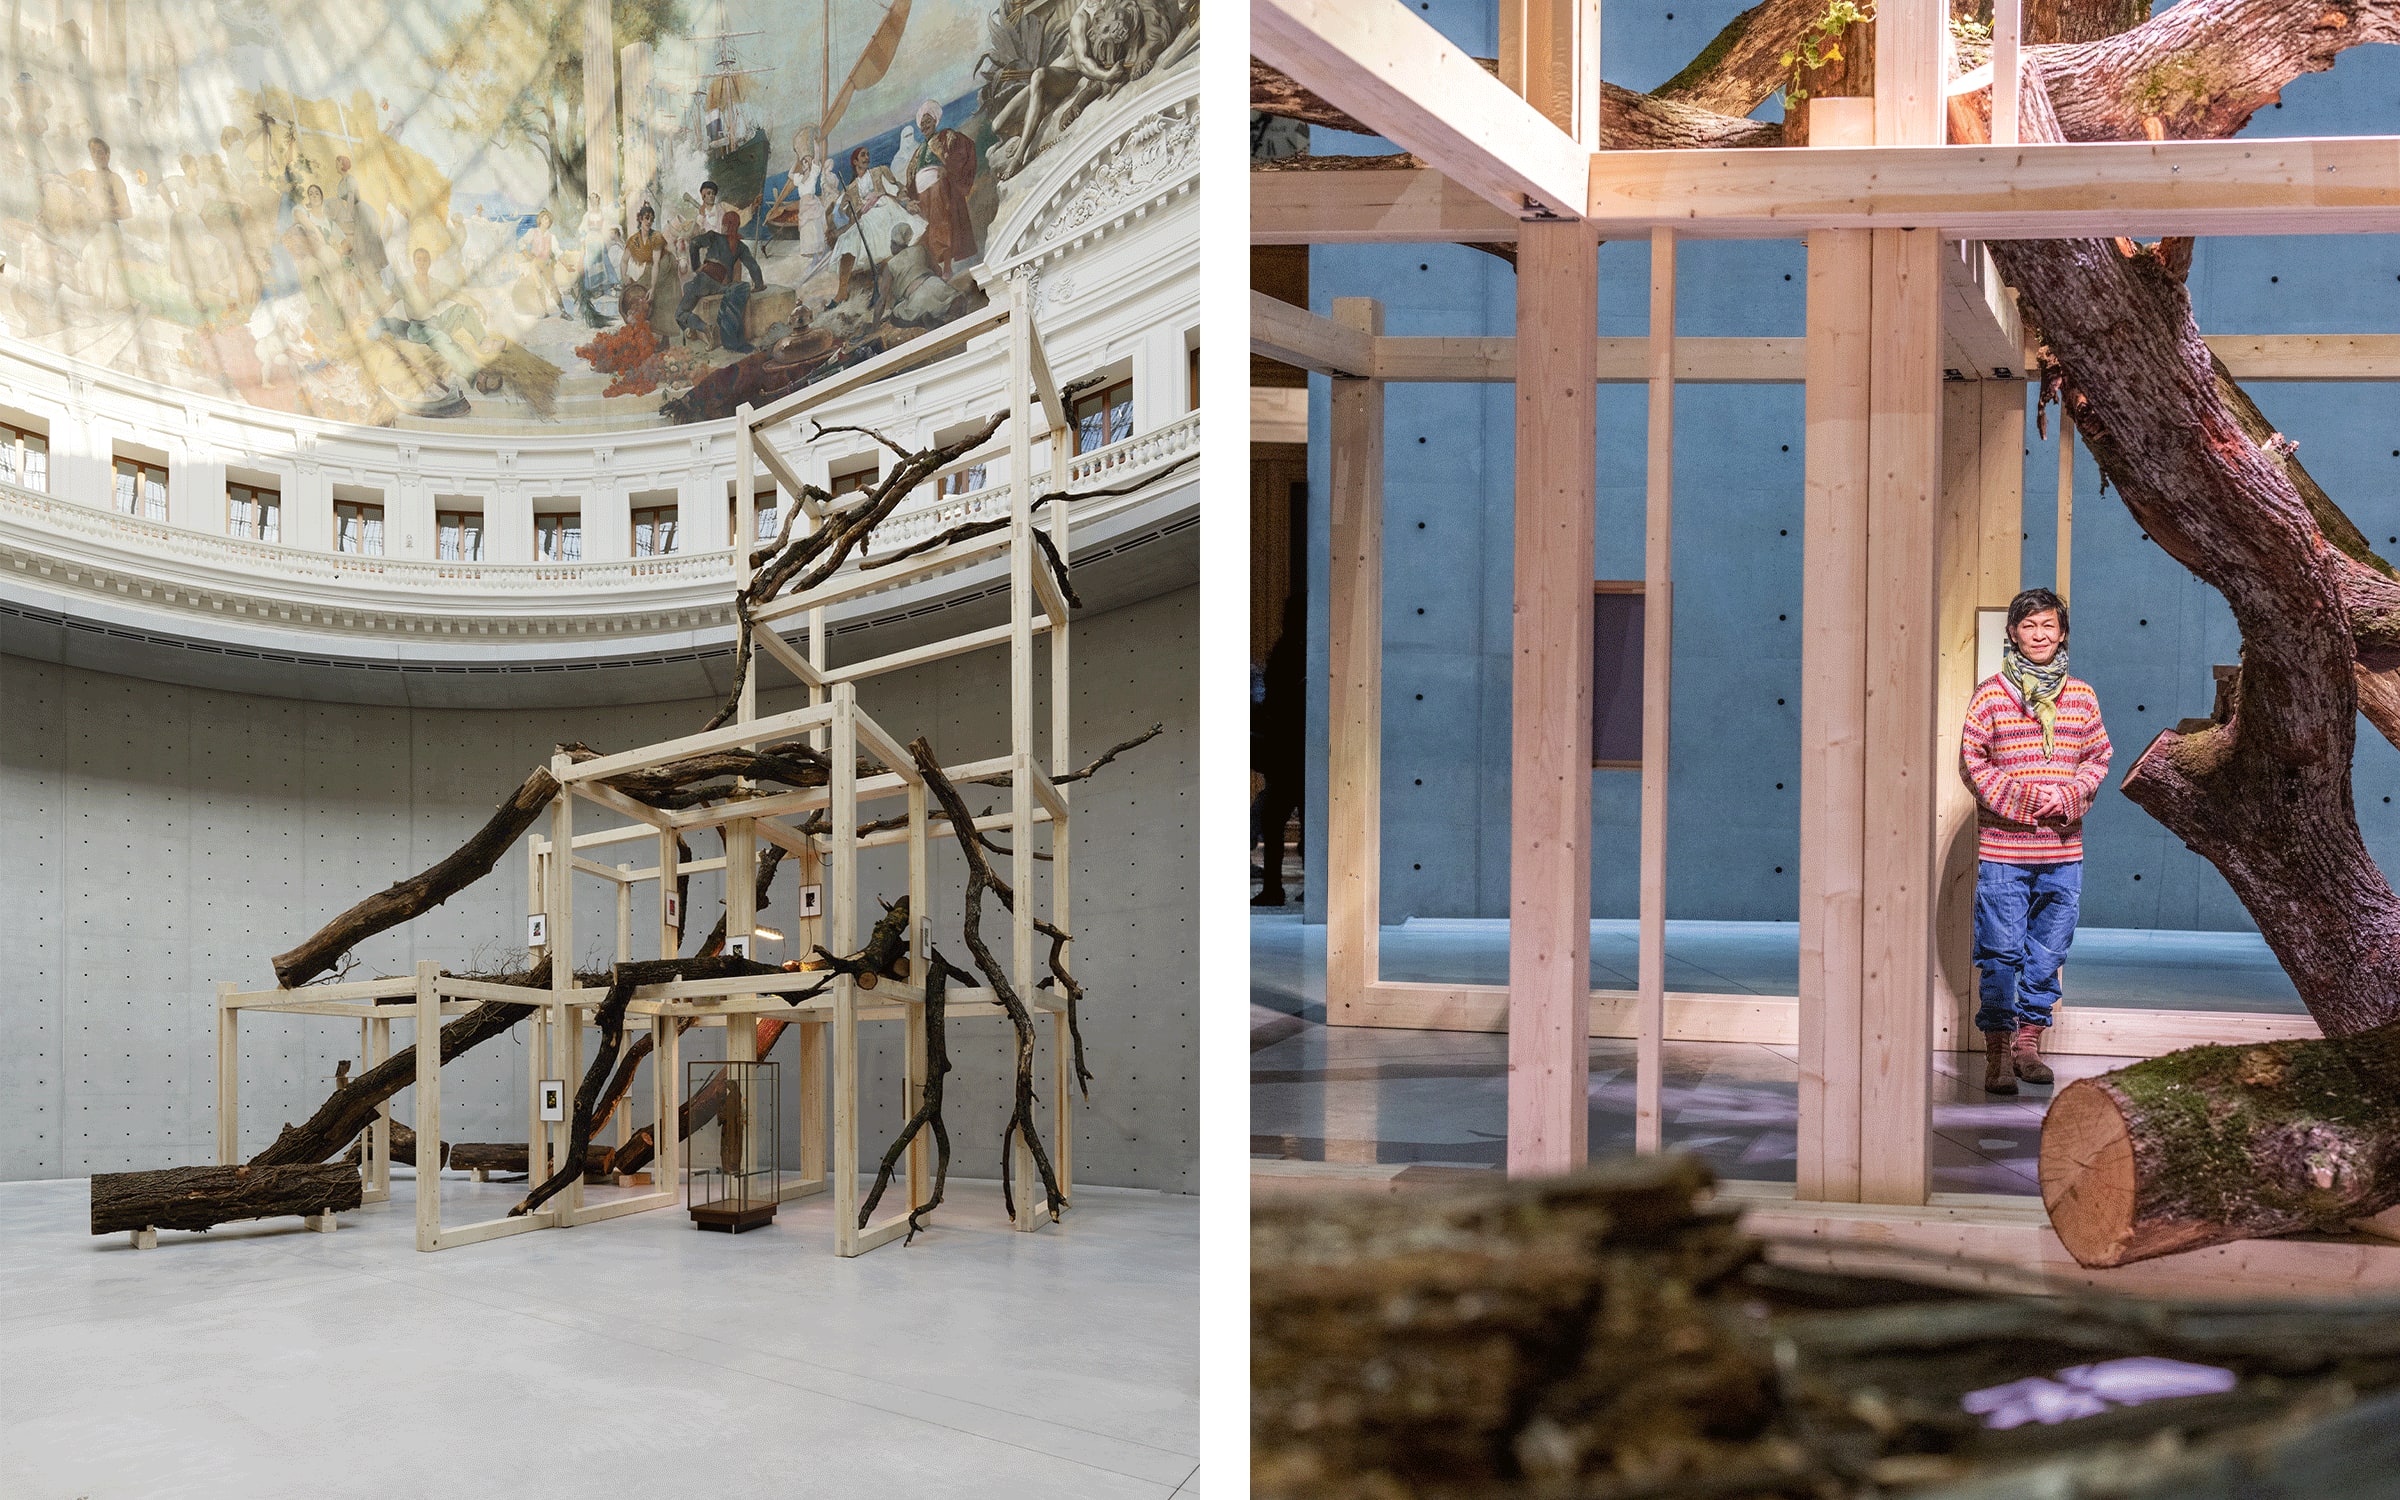 Left: Danh Vo, Tropeaolum, 2023. Courtesy of Bourse de Commerce – Pinault Collection. Right: Danh Vo, 2023. Courtesy of Bourse de Commerce – Pinault Collection.